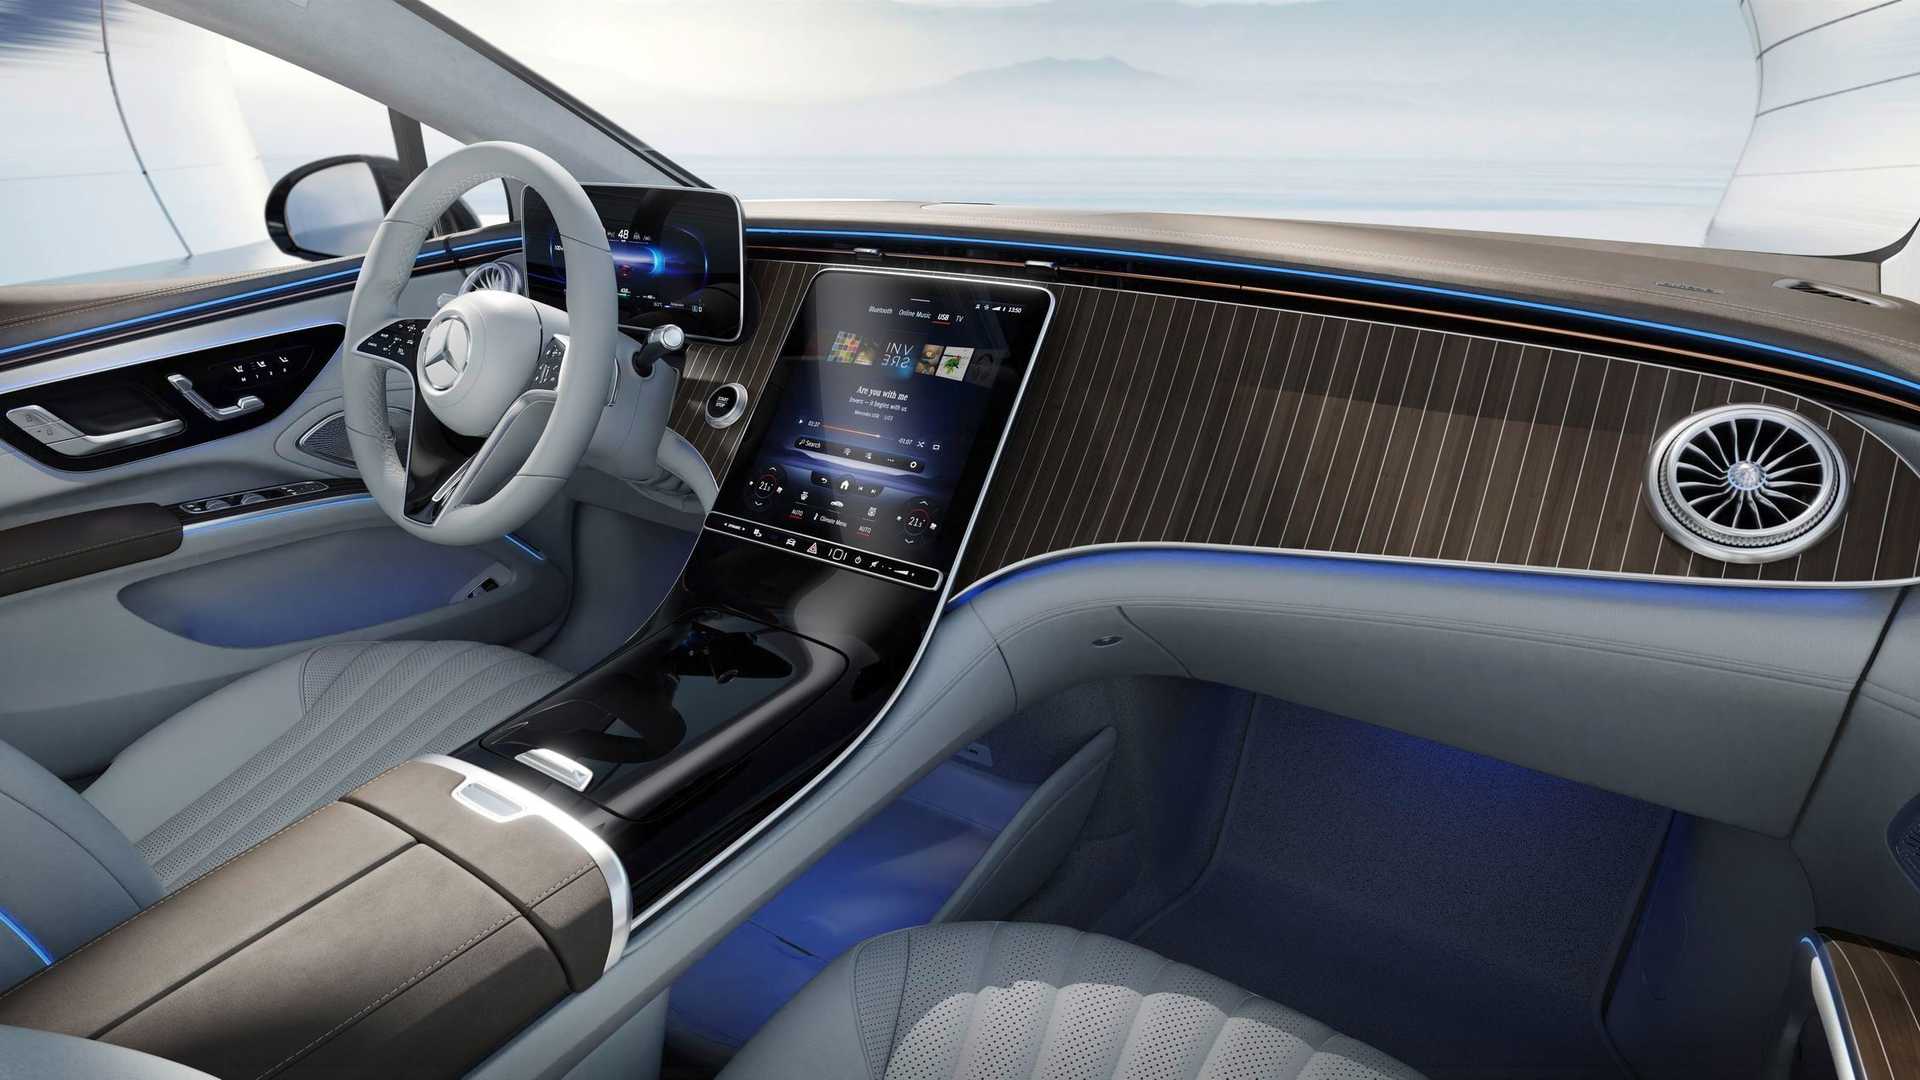 The Luxurious Interior Of The Mercedes Benz All Electric Eqs Revealed